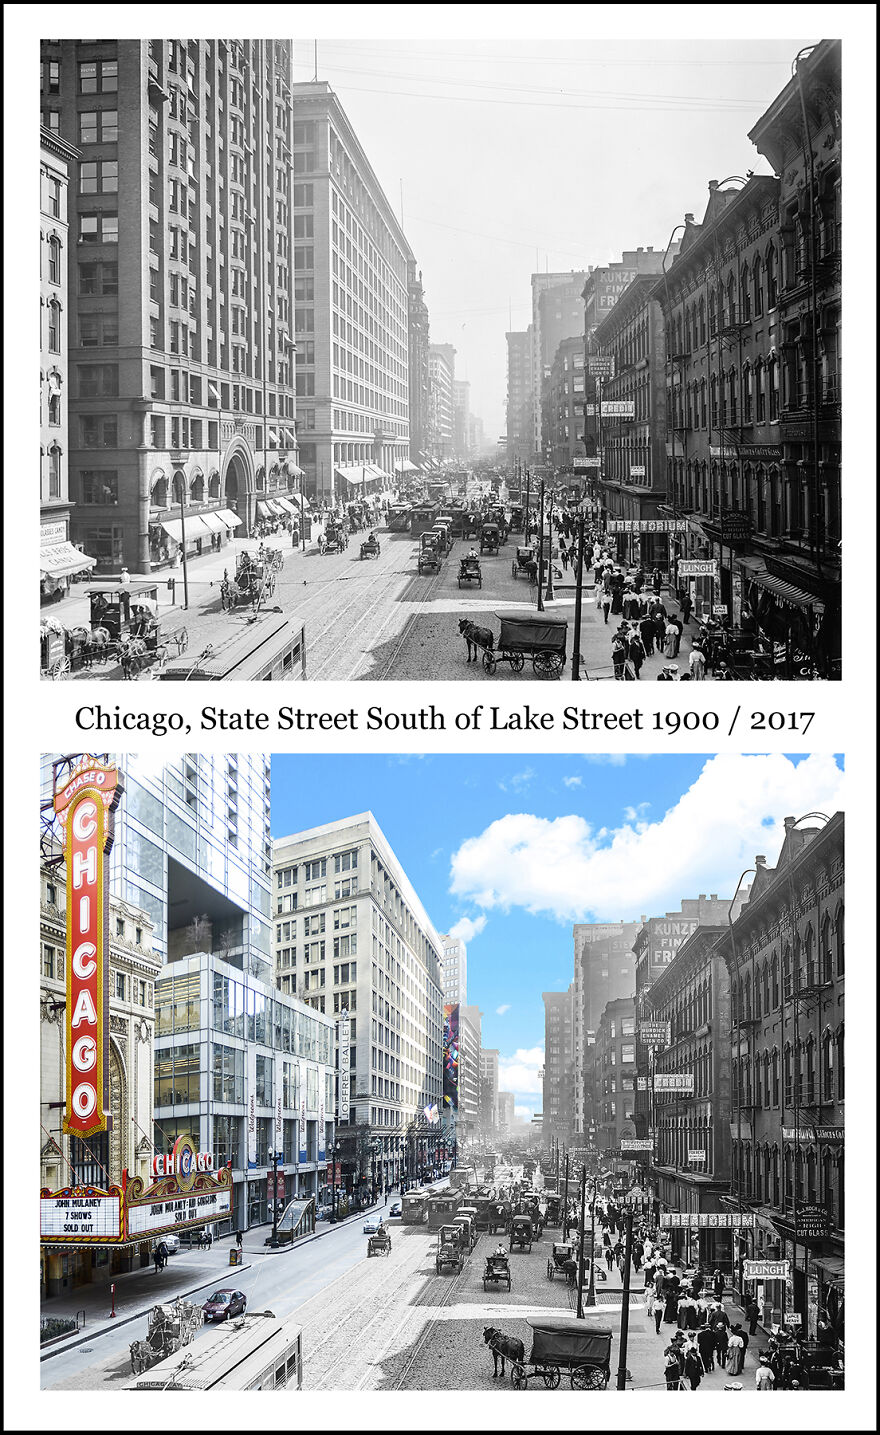 Chicago, State Street South Of Lake Street 1900 / 2017